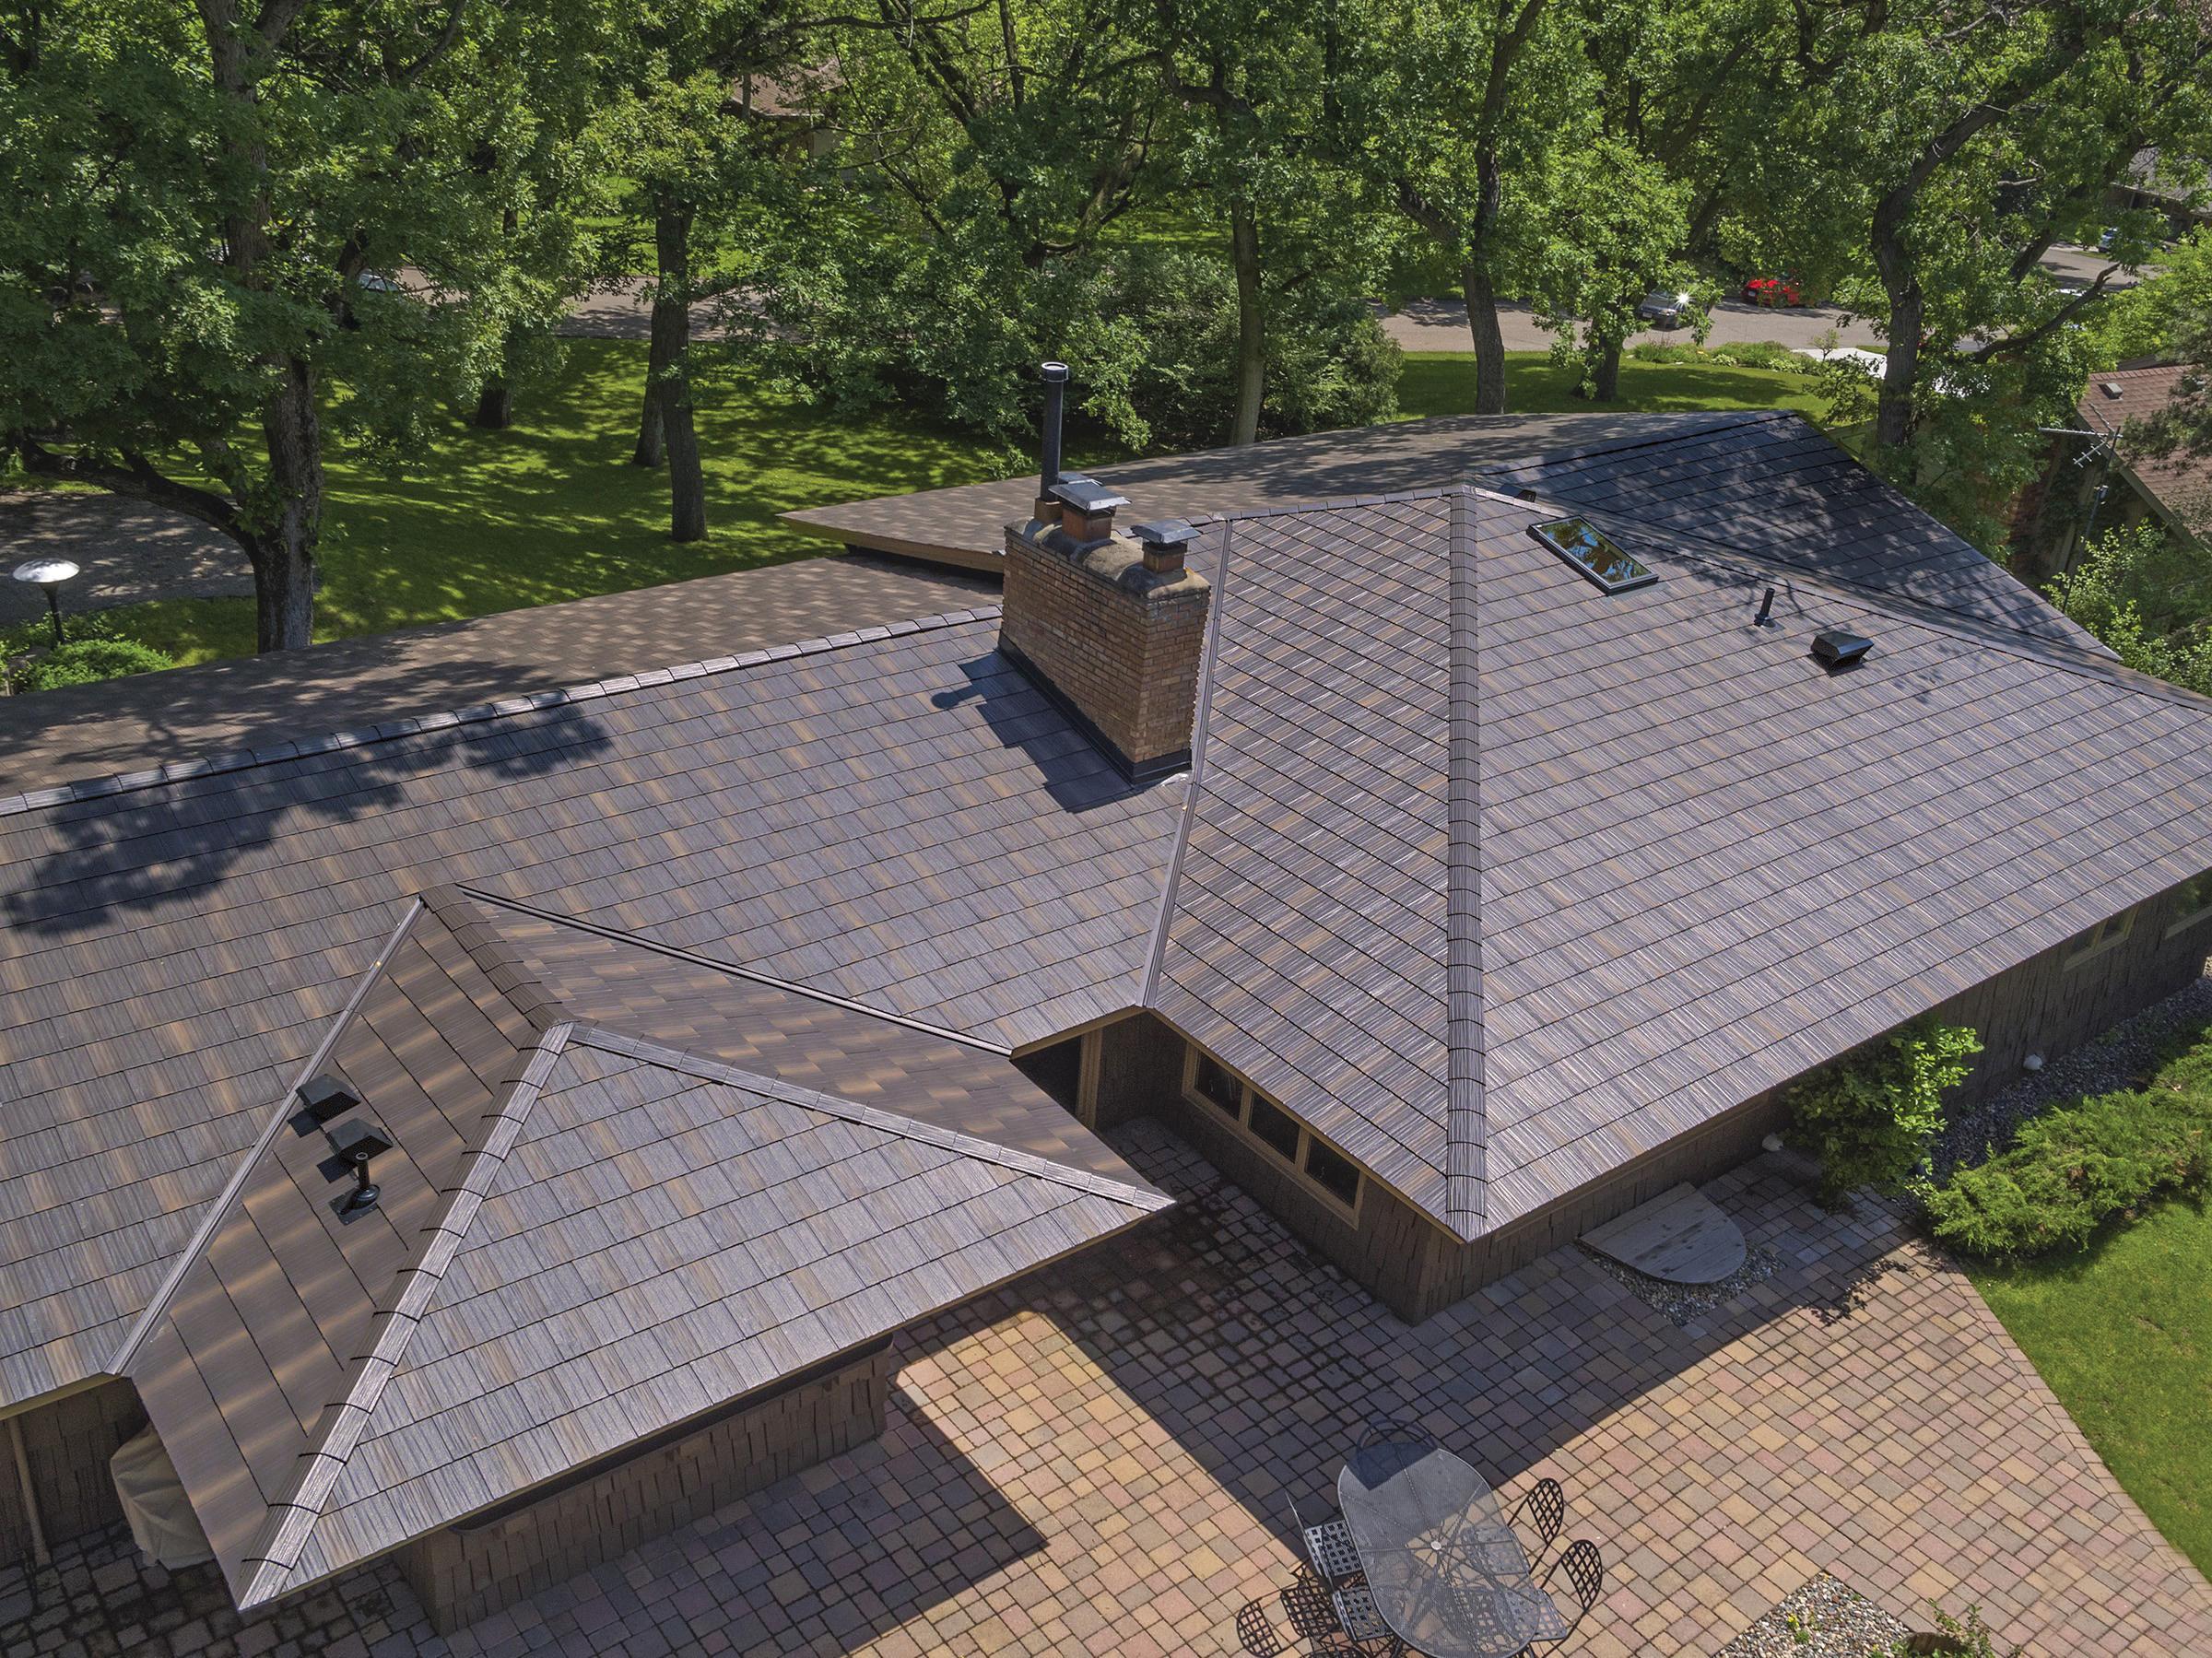 The award-winning Infiniti Textured Shake, the most technolgically advanced roofing panel in the industry, was selected to replace an existing roof because of its unmatched durability and performance